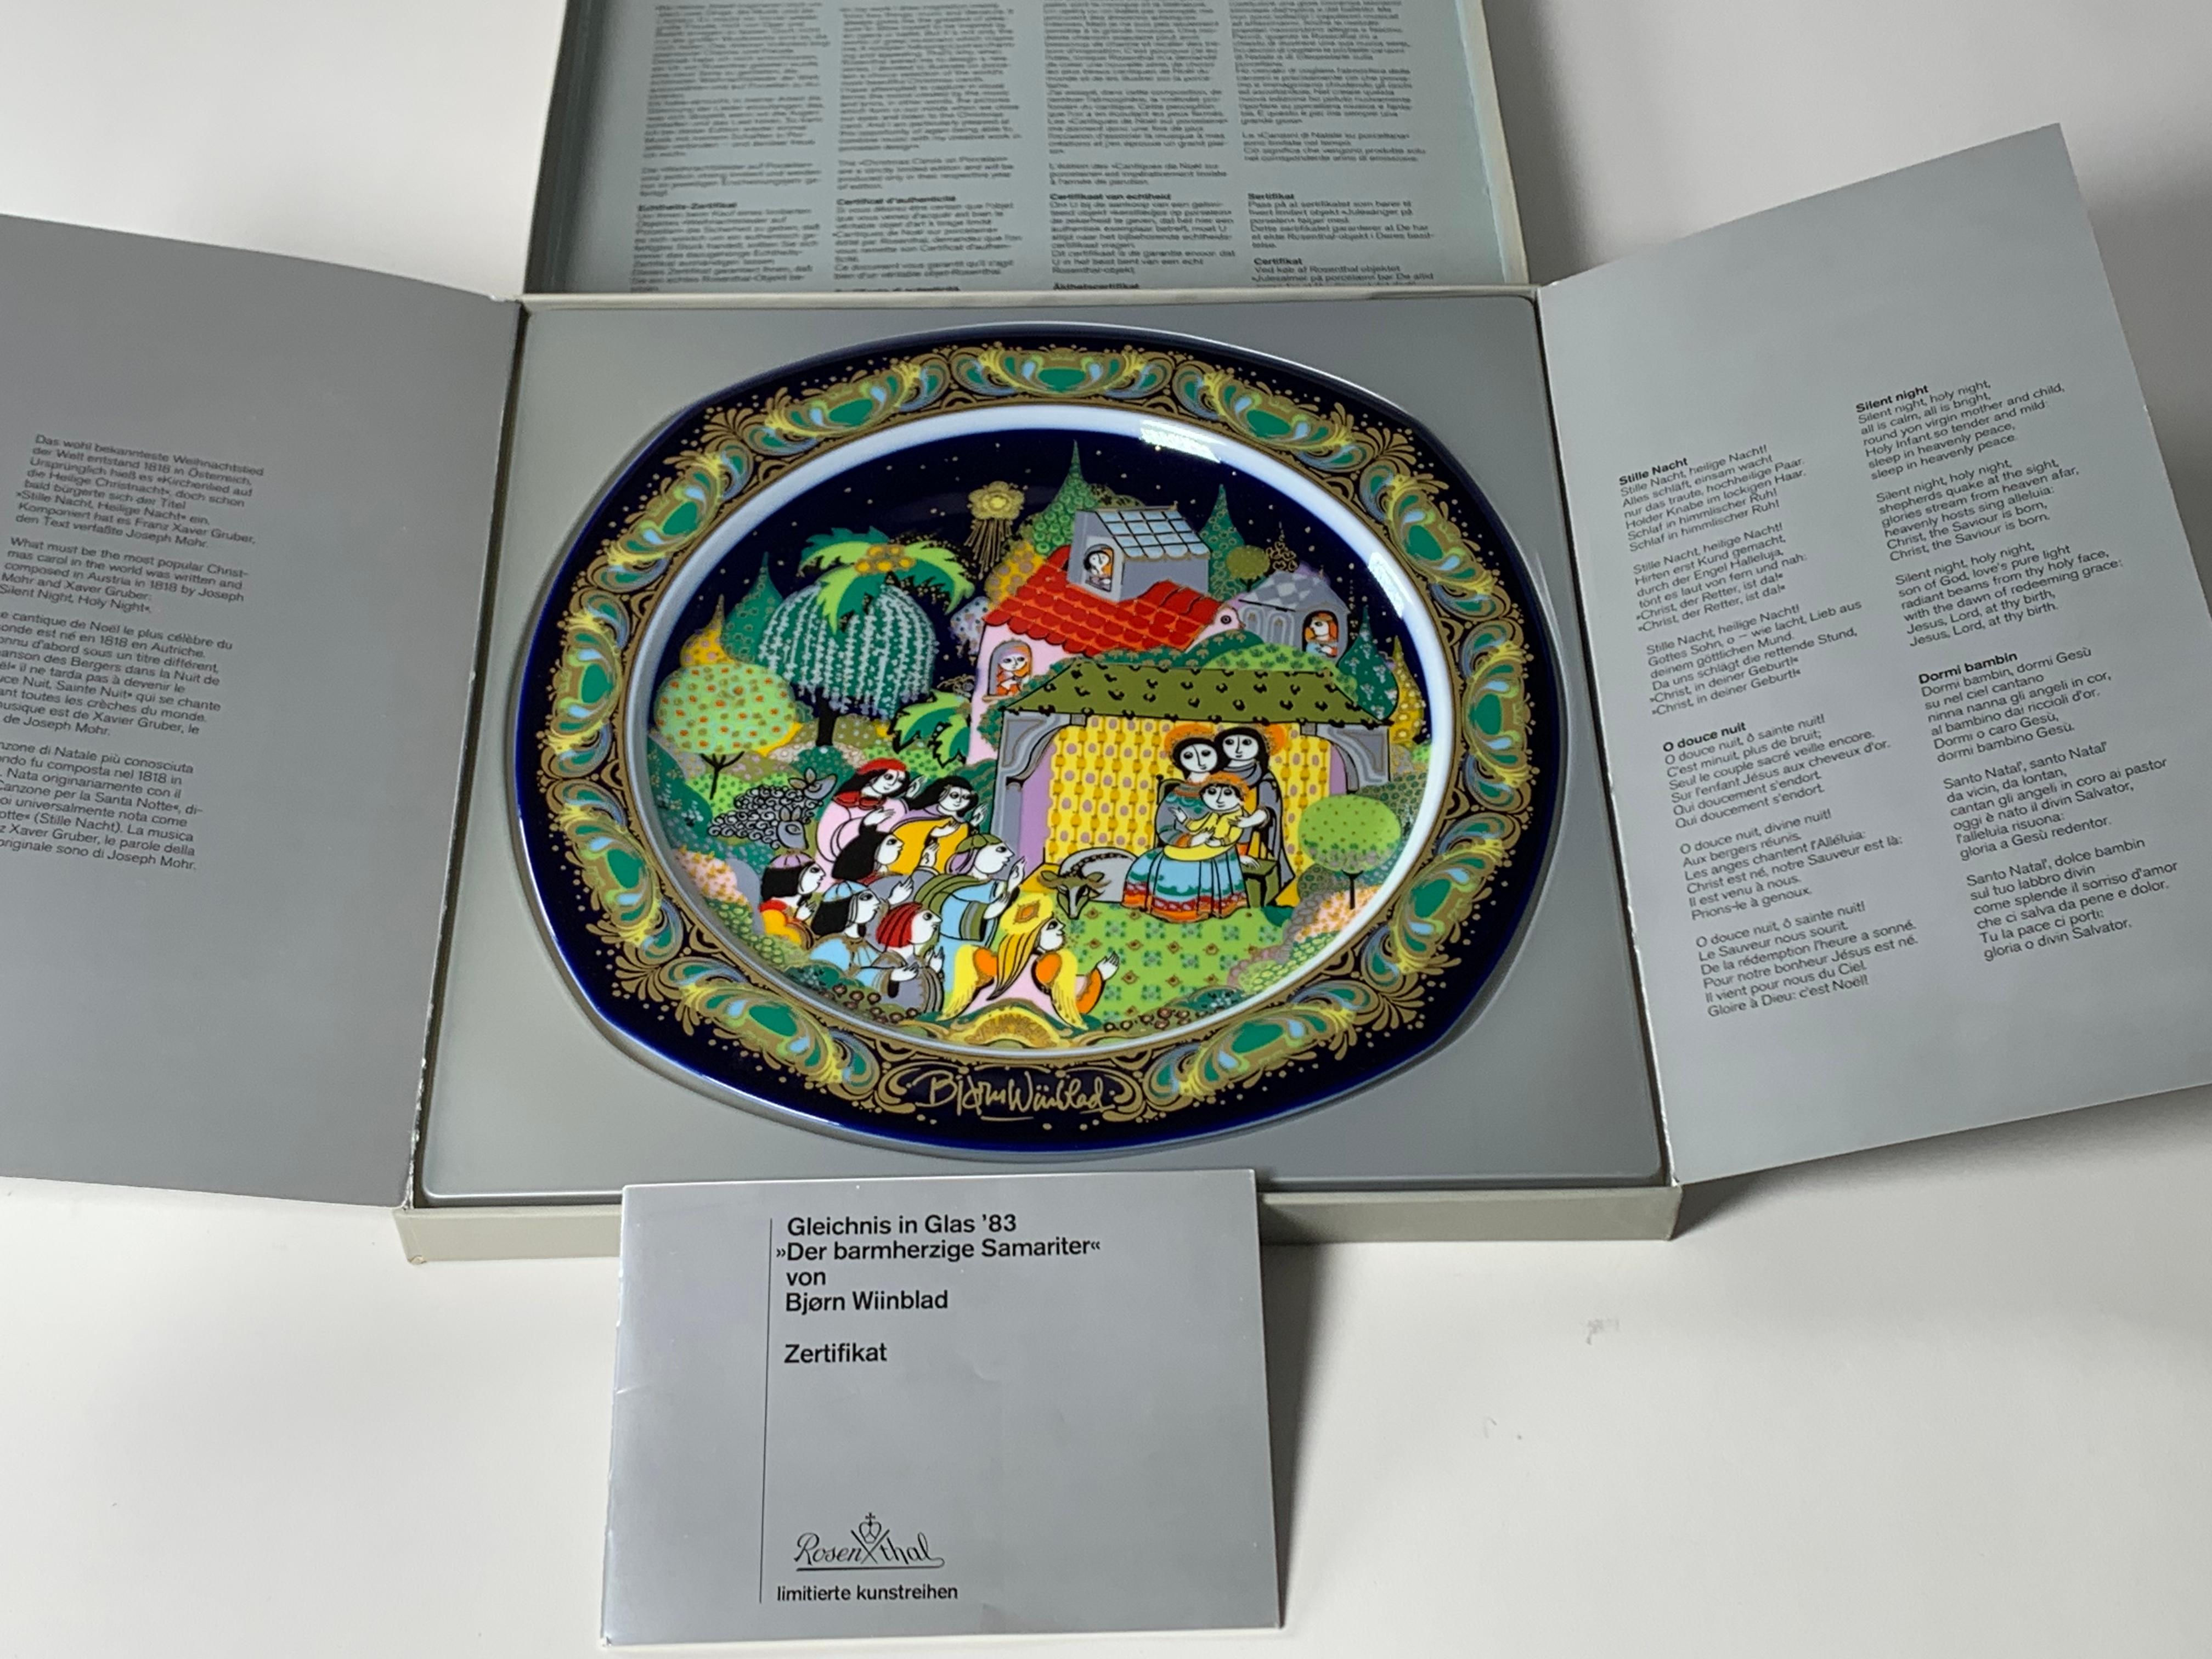 Porcelain Christmas plate from 1983 by Bjorn Wiinblad made by the German manufacturer Rosenthal. The dish is titled “Silent night”. When Rosenthal asked the Danish artist to illustrate a new series of dishes, he decided to choose the most beautiful